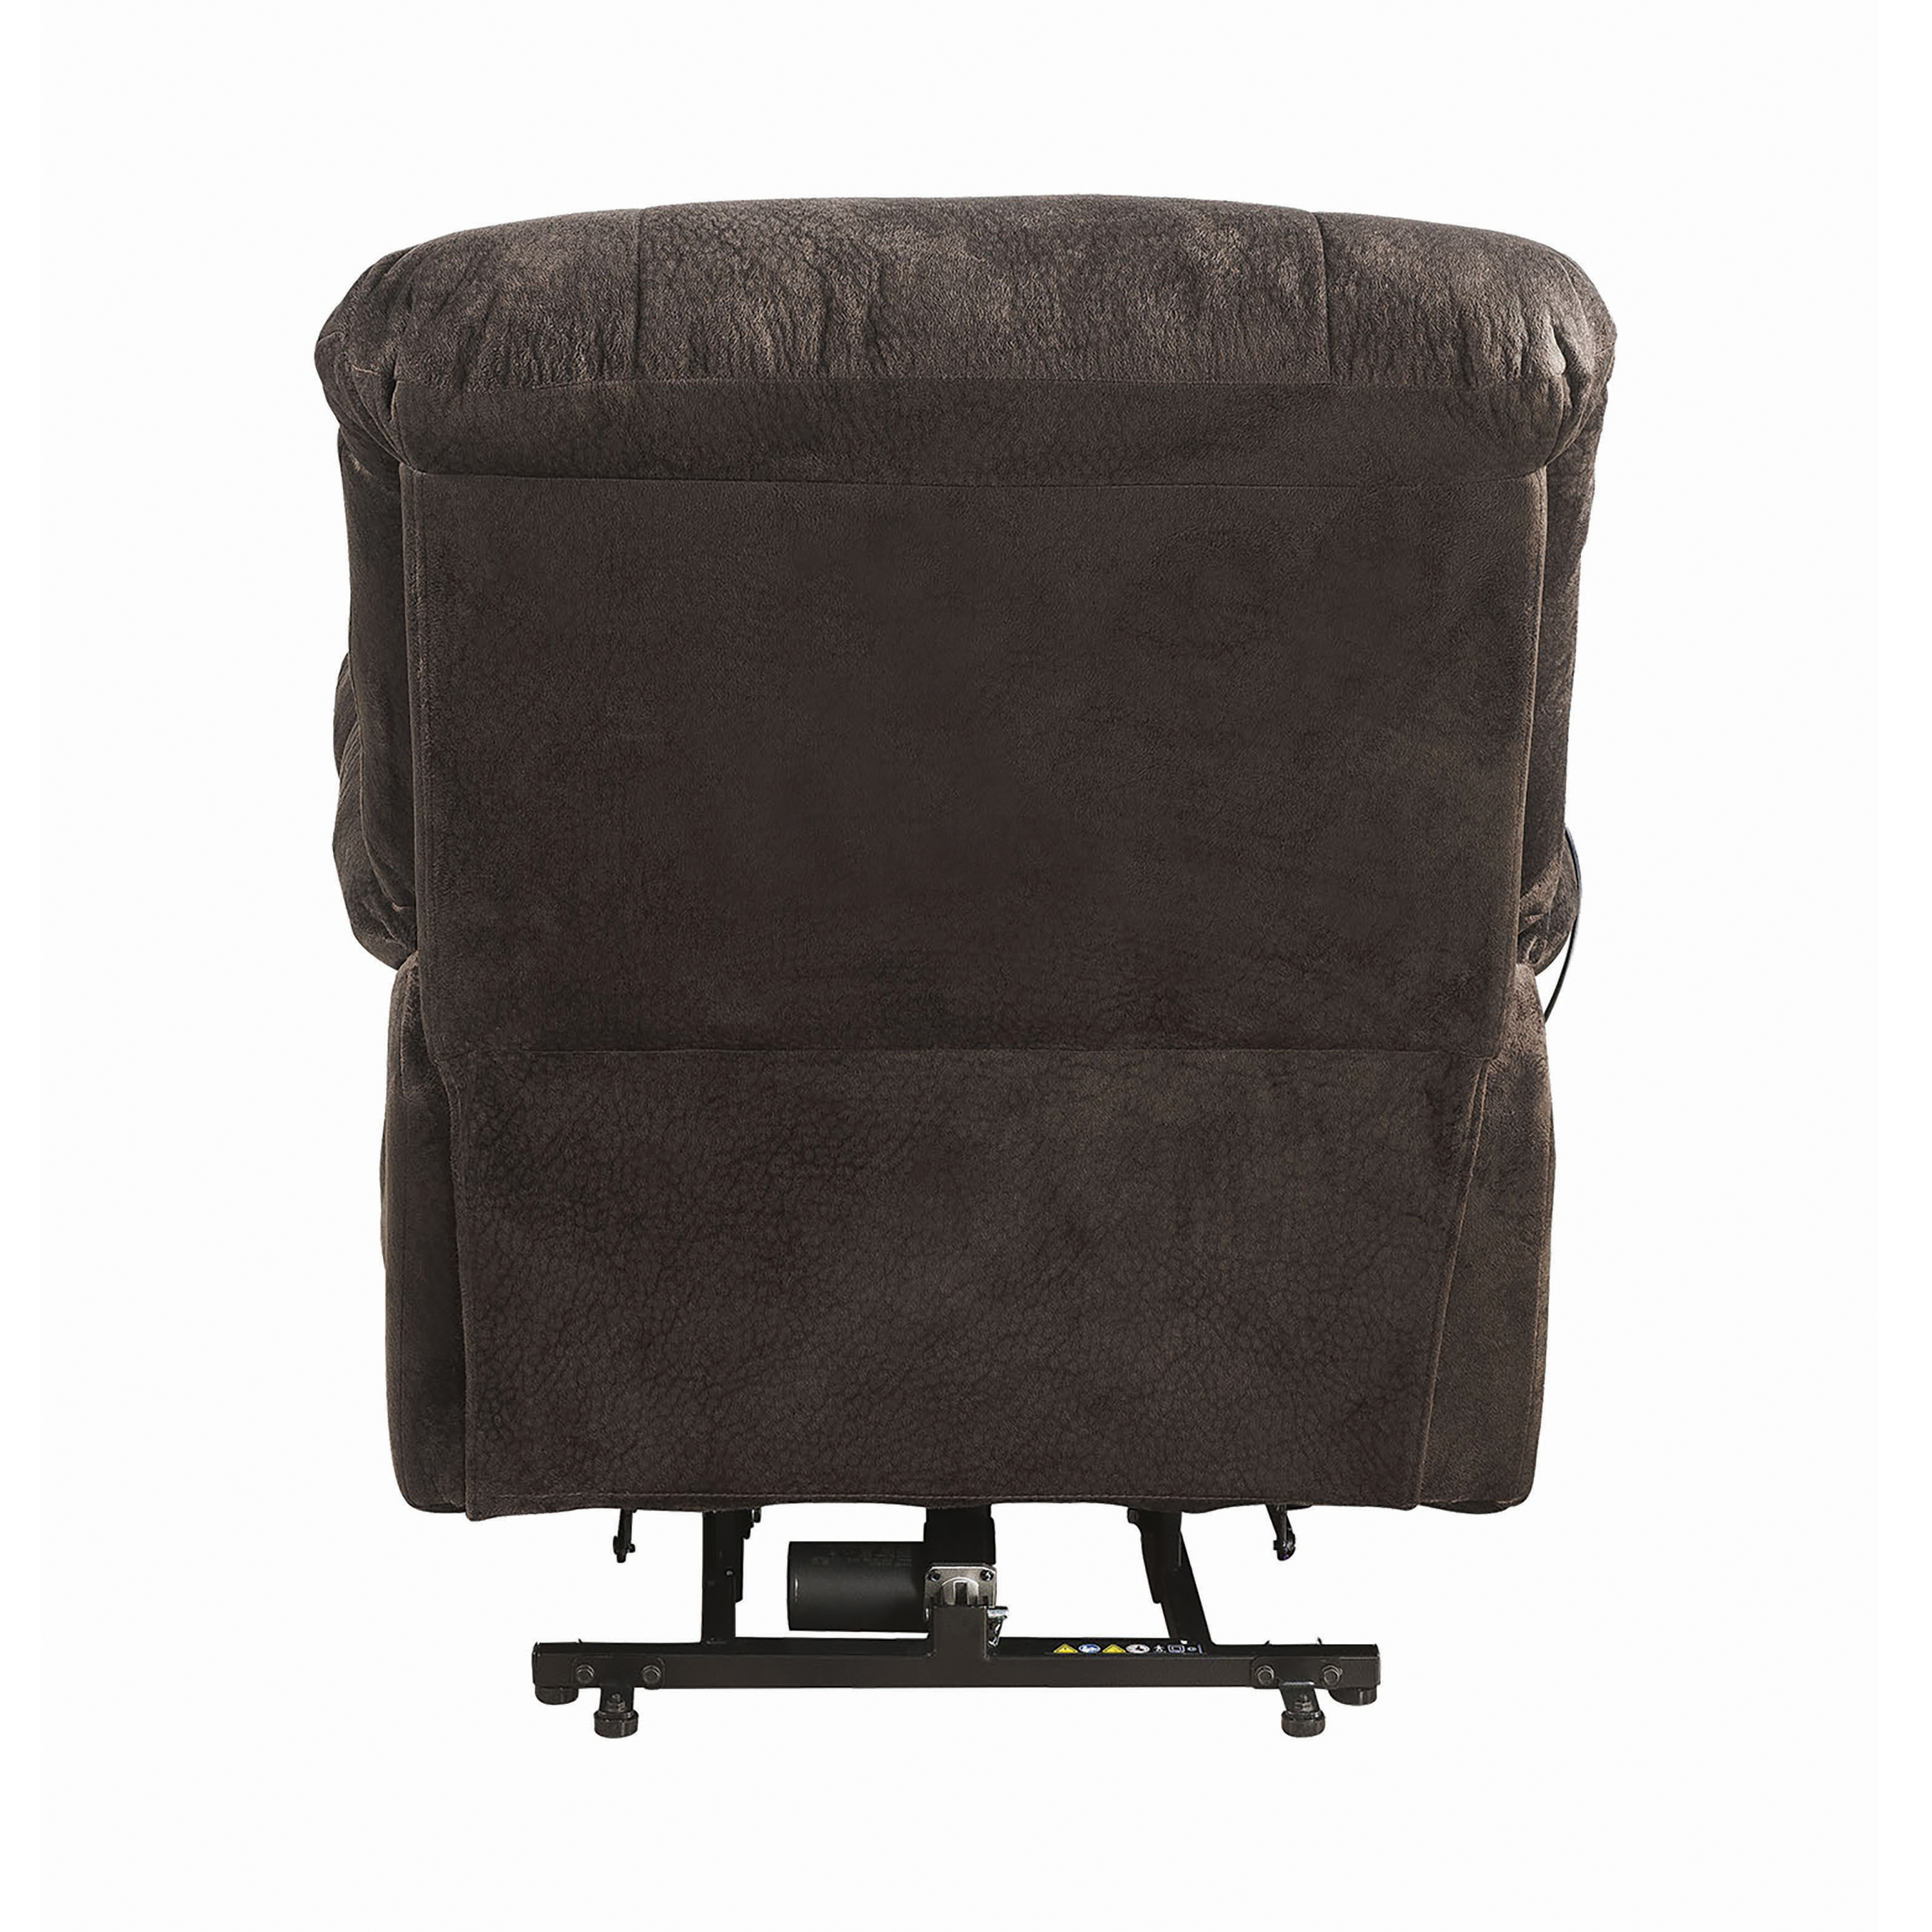 Coaster Company Power Lift Recliner, Chocolate - image 3 of 3